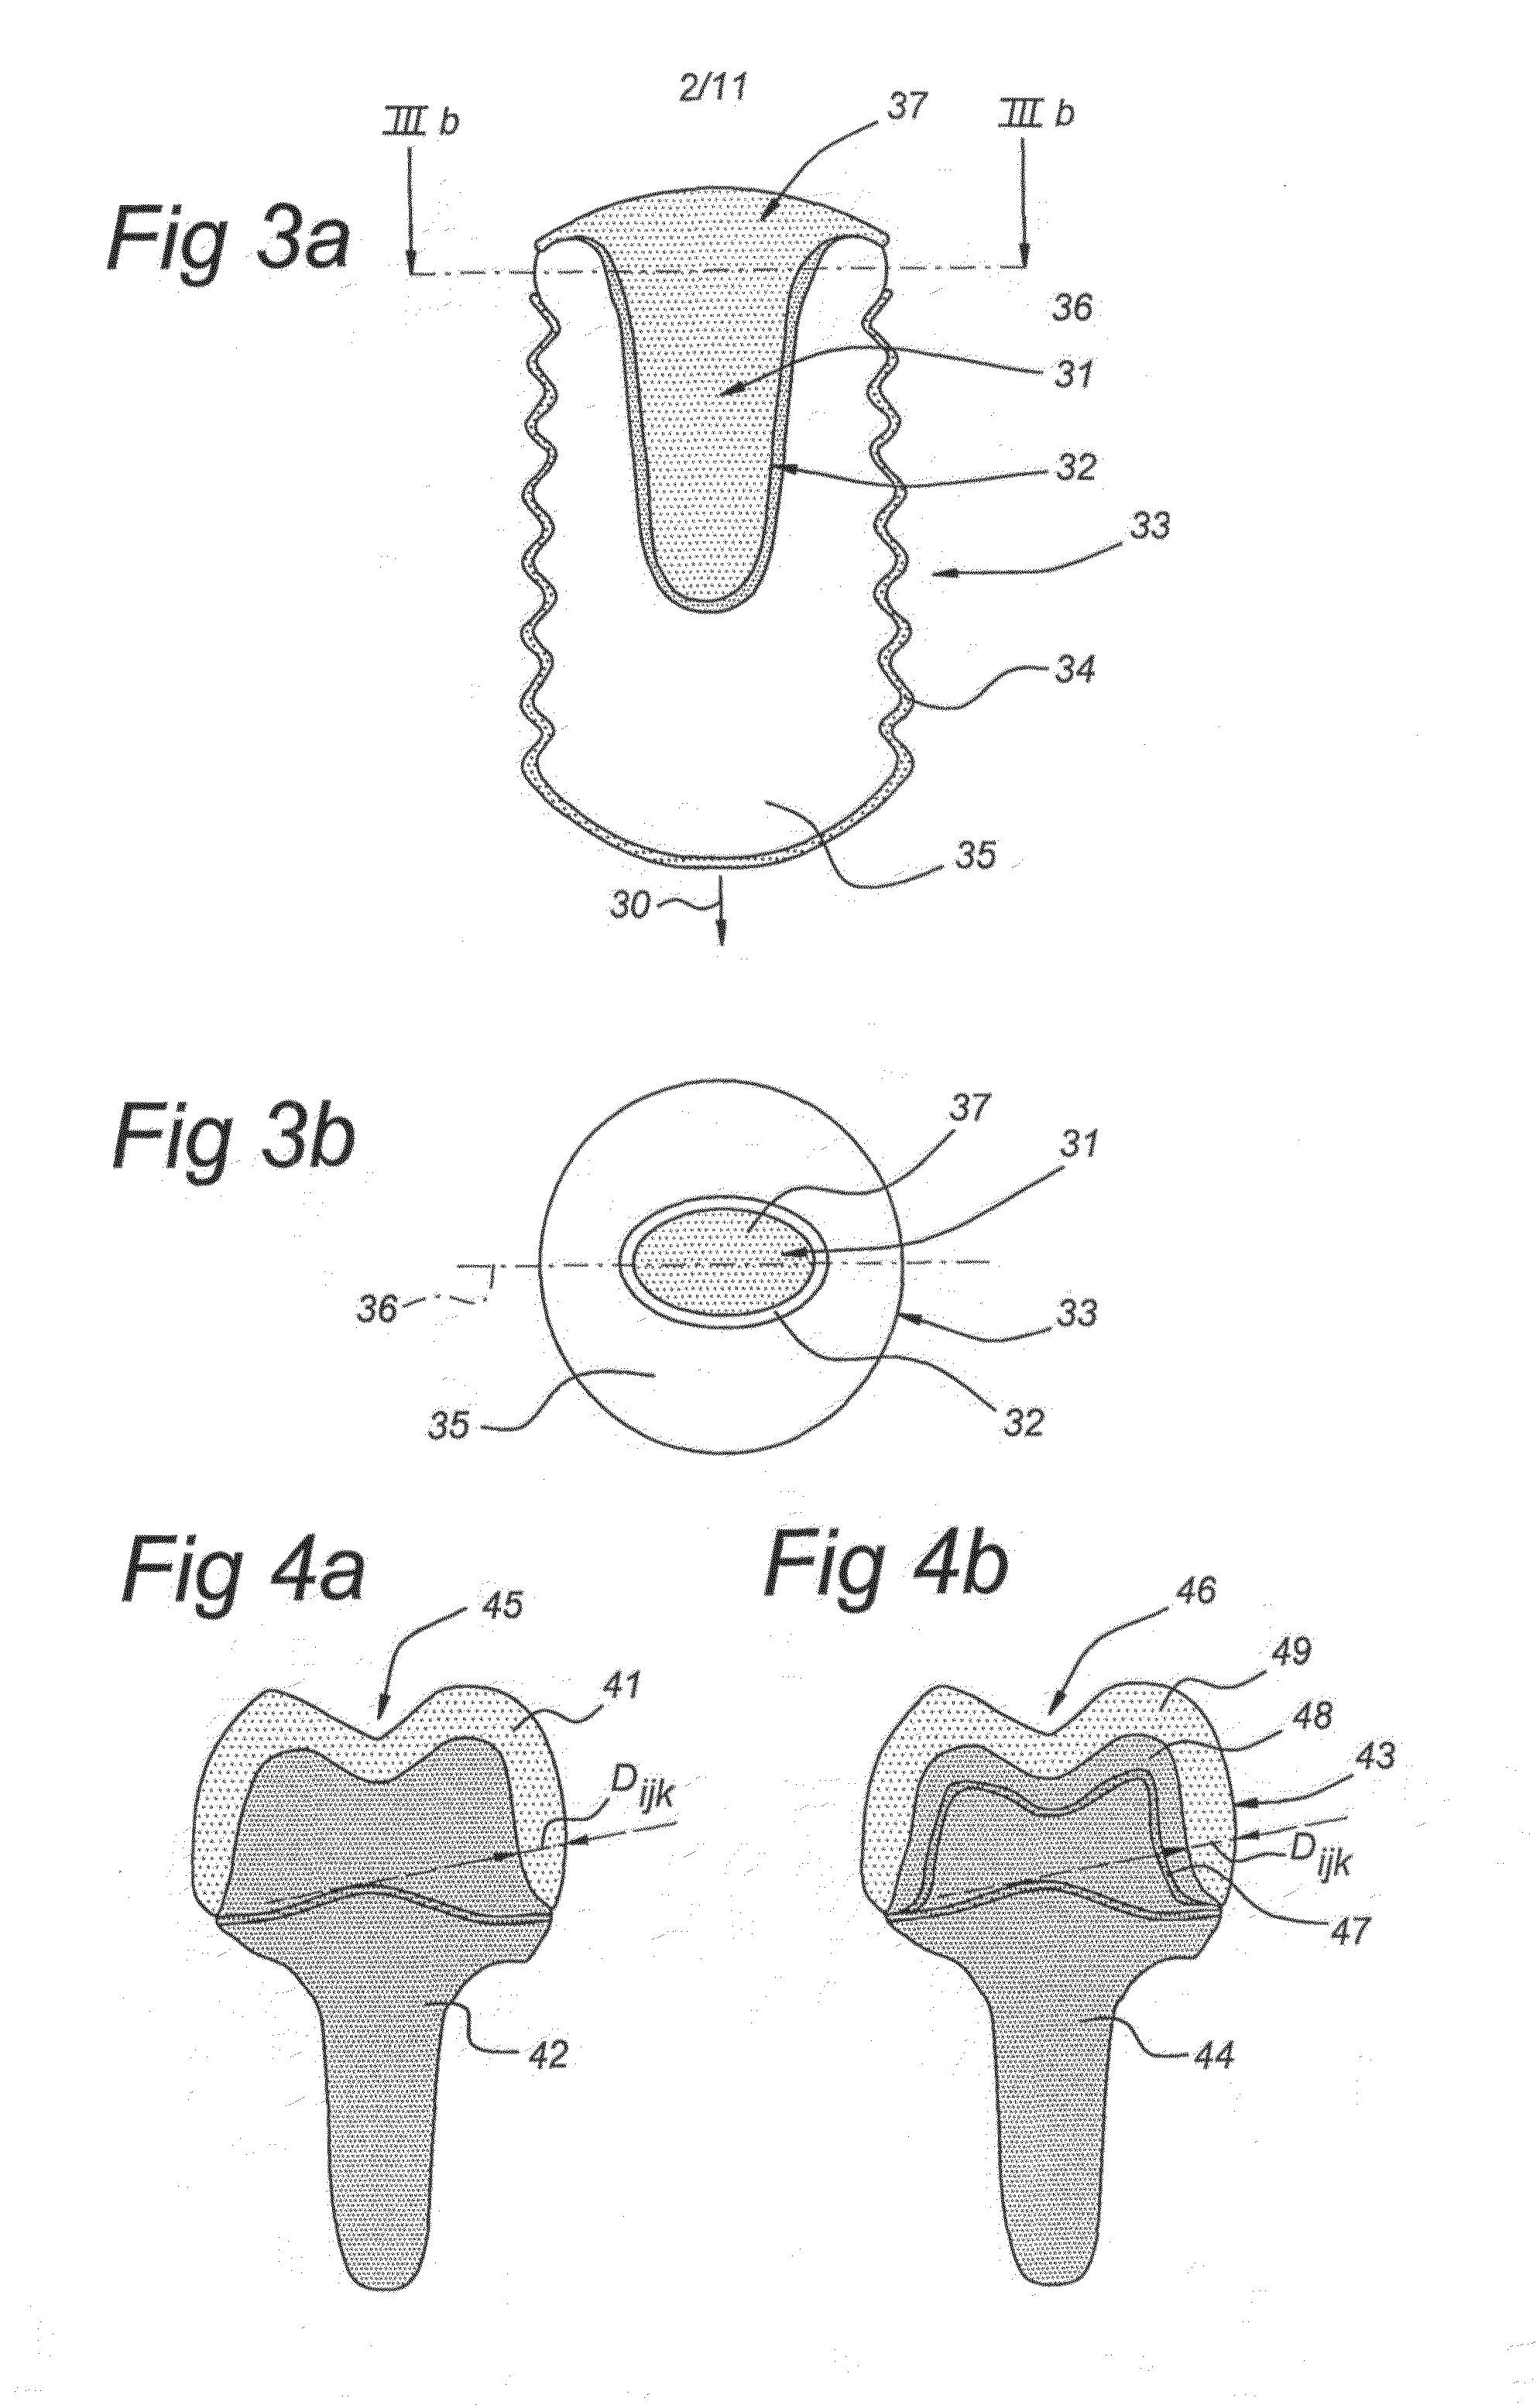 Method of manufacturing and installing a ceramic dental implant with an aesthetic implant abutment